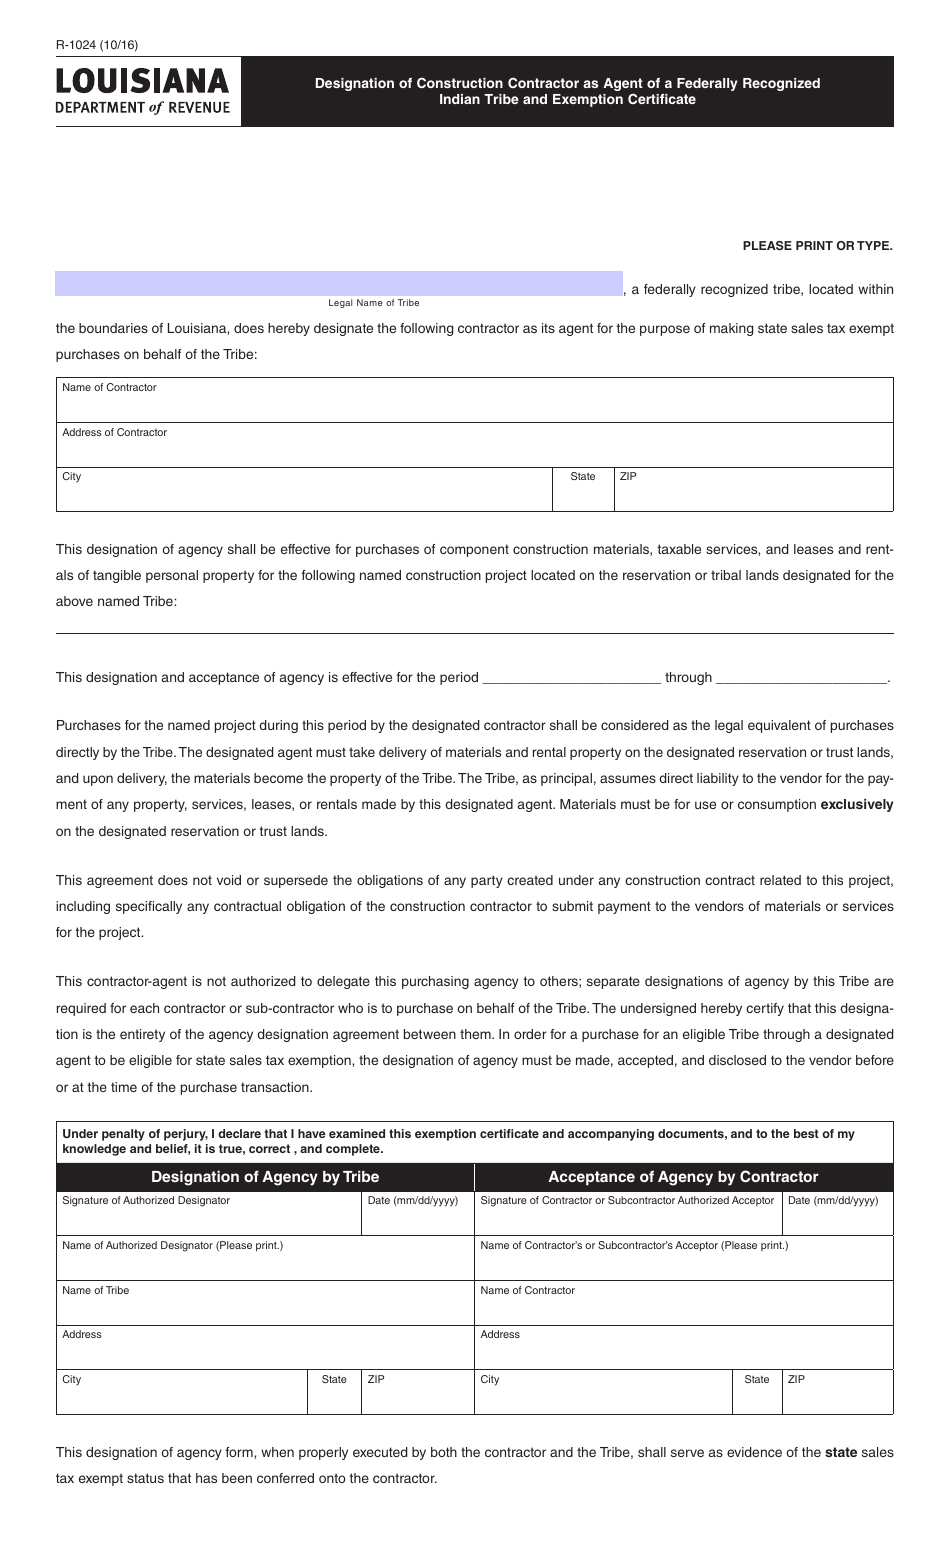 Form R-1024 Designation of Construction Contractor as Agent of a Federally Recognized Indian Tribe and Exemption Certificate - Louisiana, Page 1